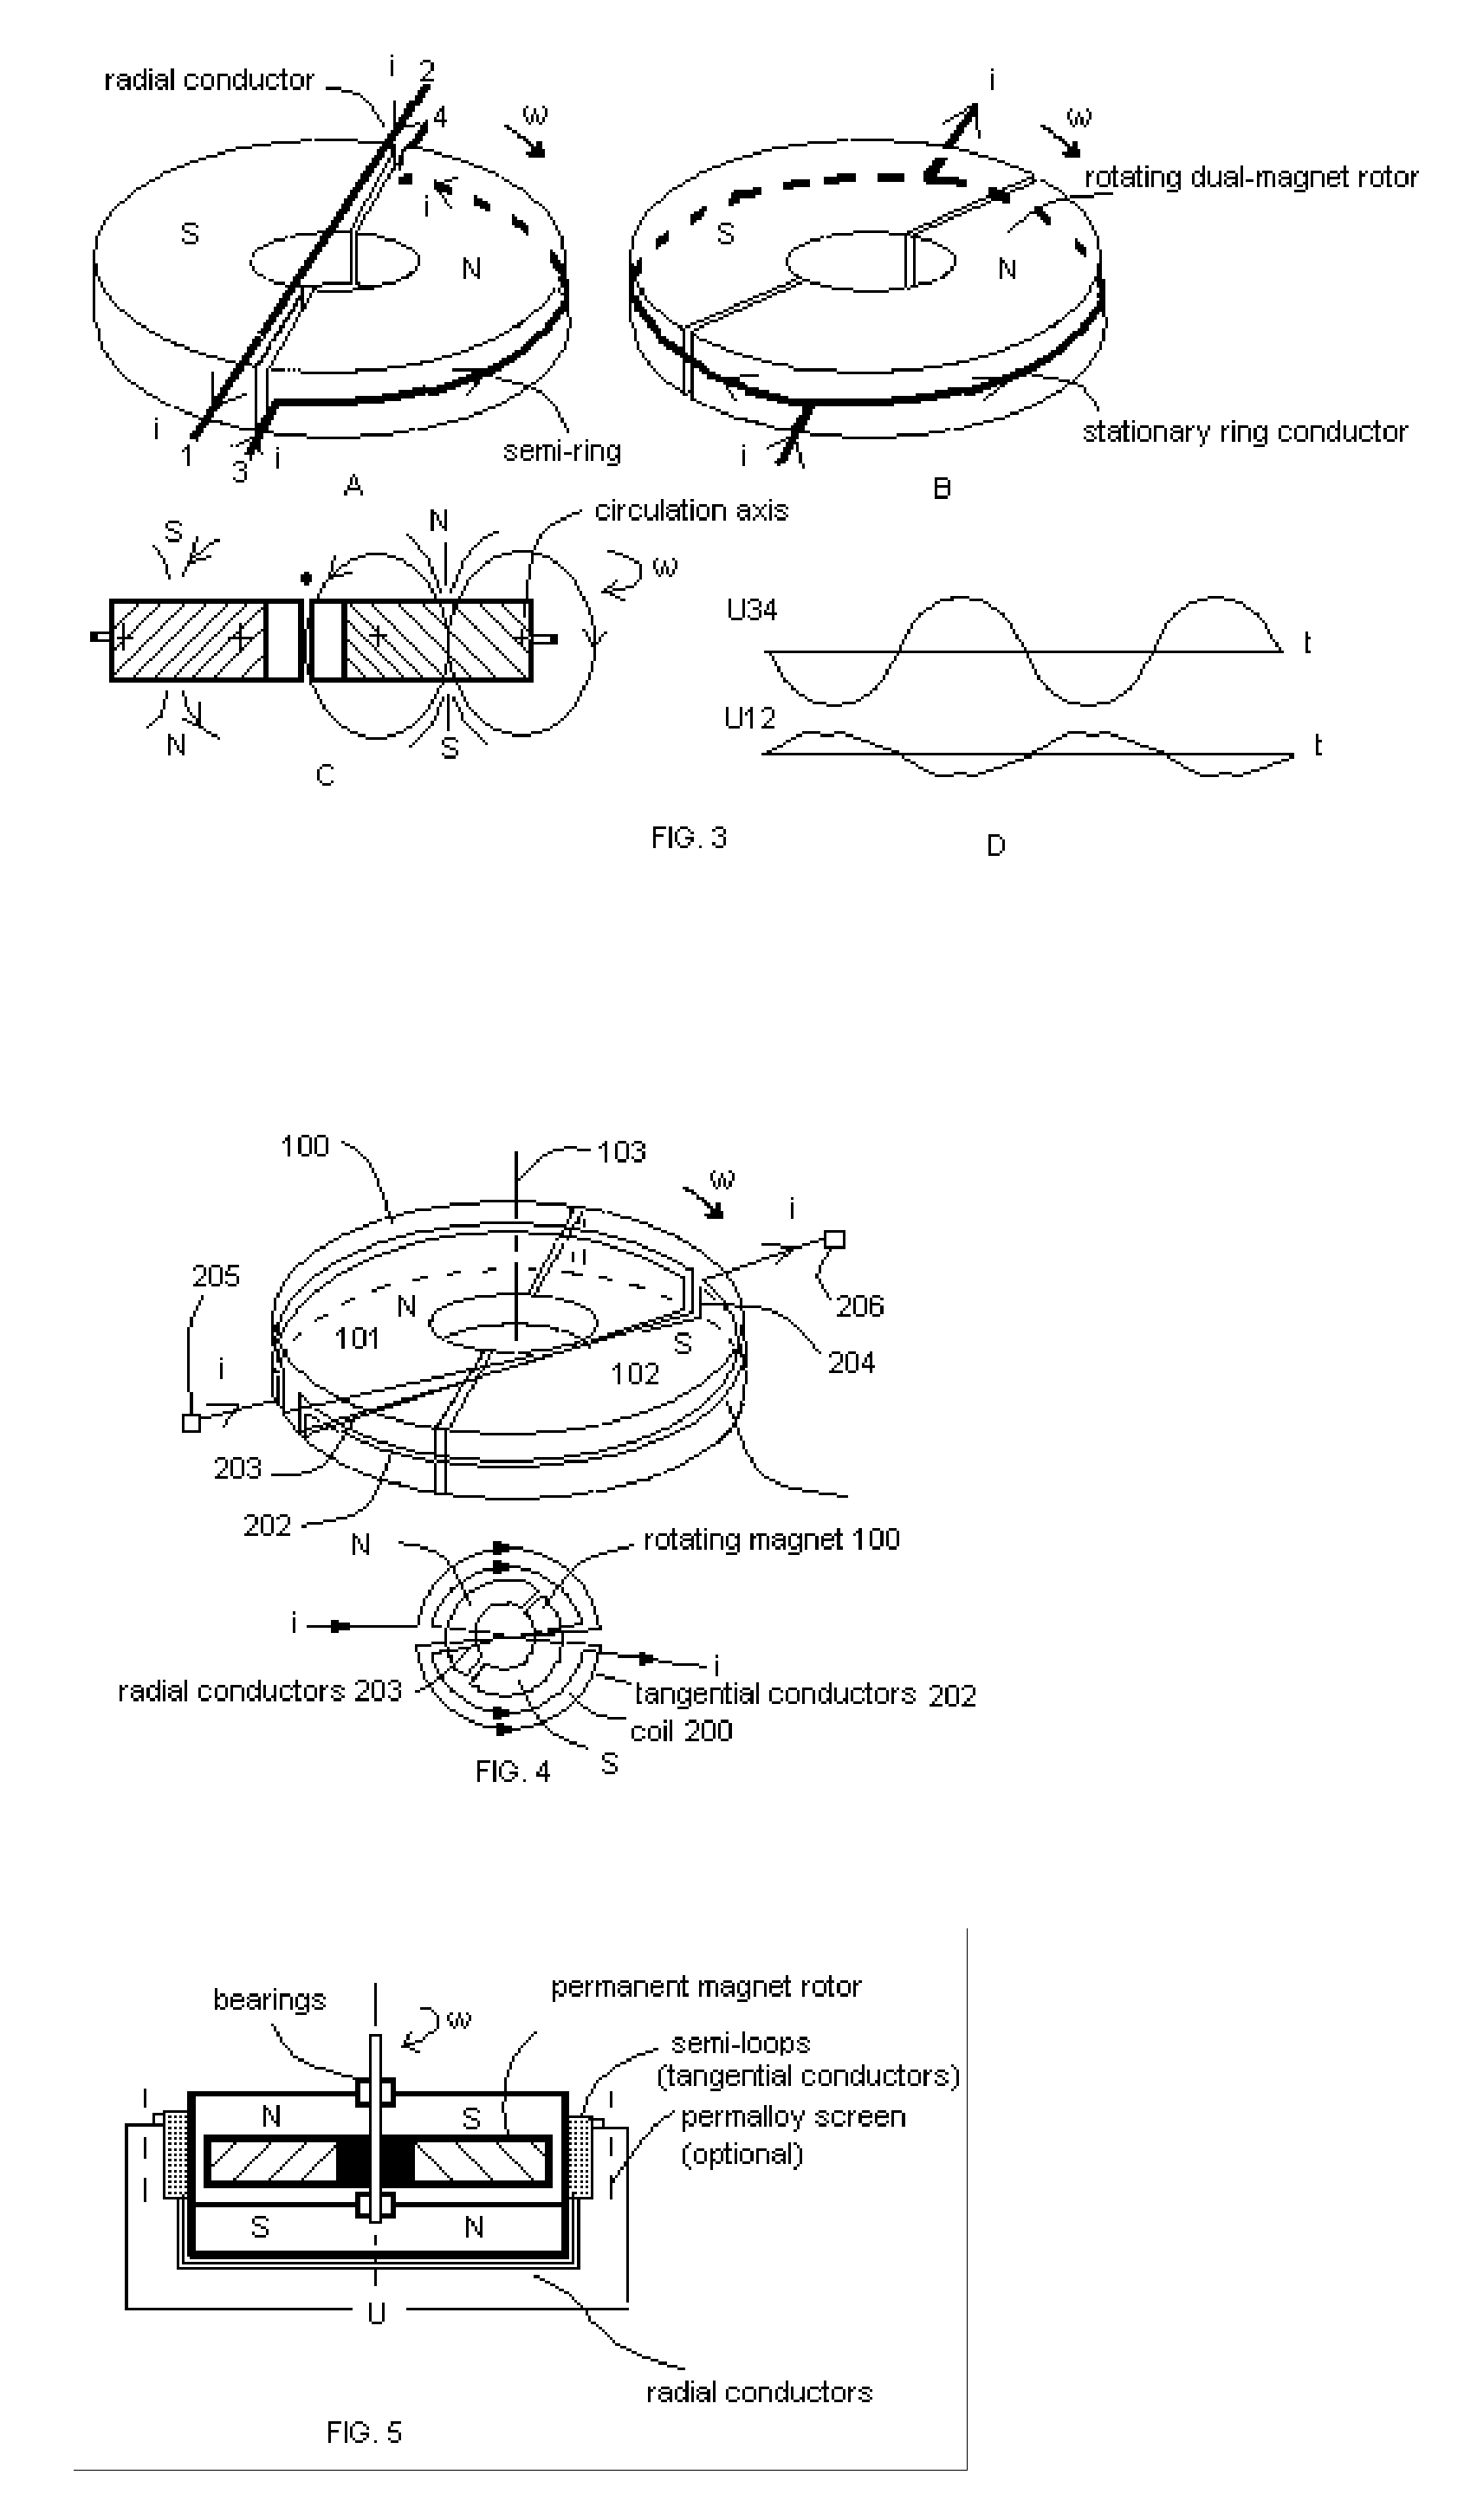 Tangential induction dynamoelectric machines